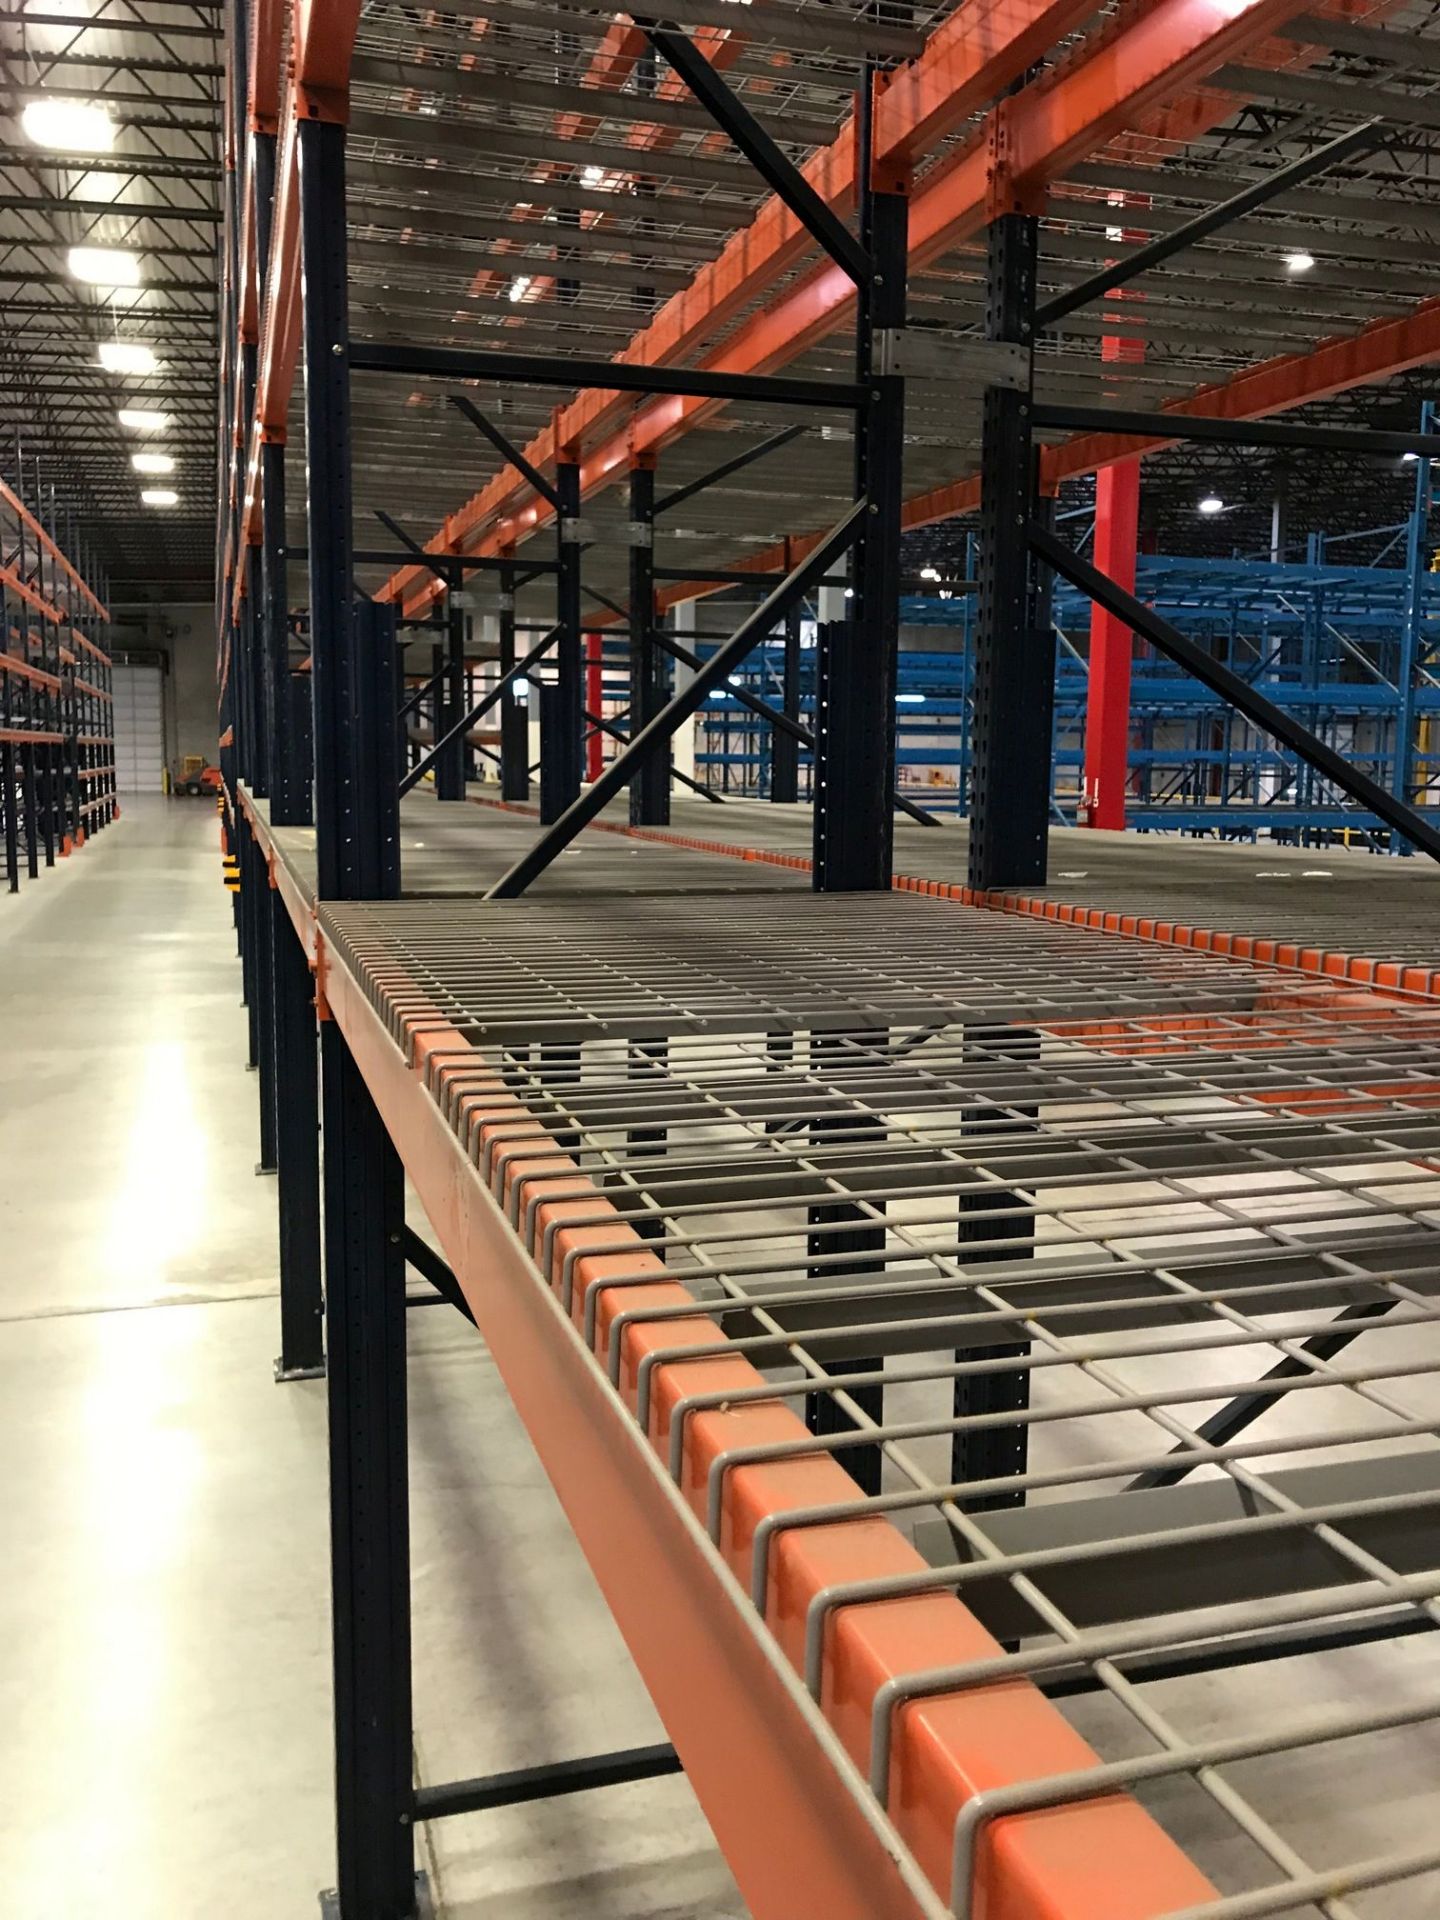 SECTIONS 60" X 108" X 288" TEARDROP TYPE ADJUSTABLE BEAM PALLET RACK WITH WIRE DECKING, 6" HIGH - Image 6 of 13